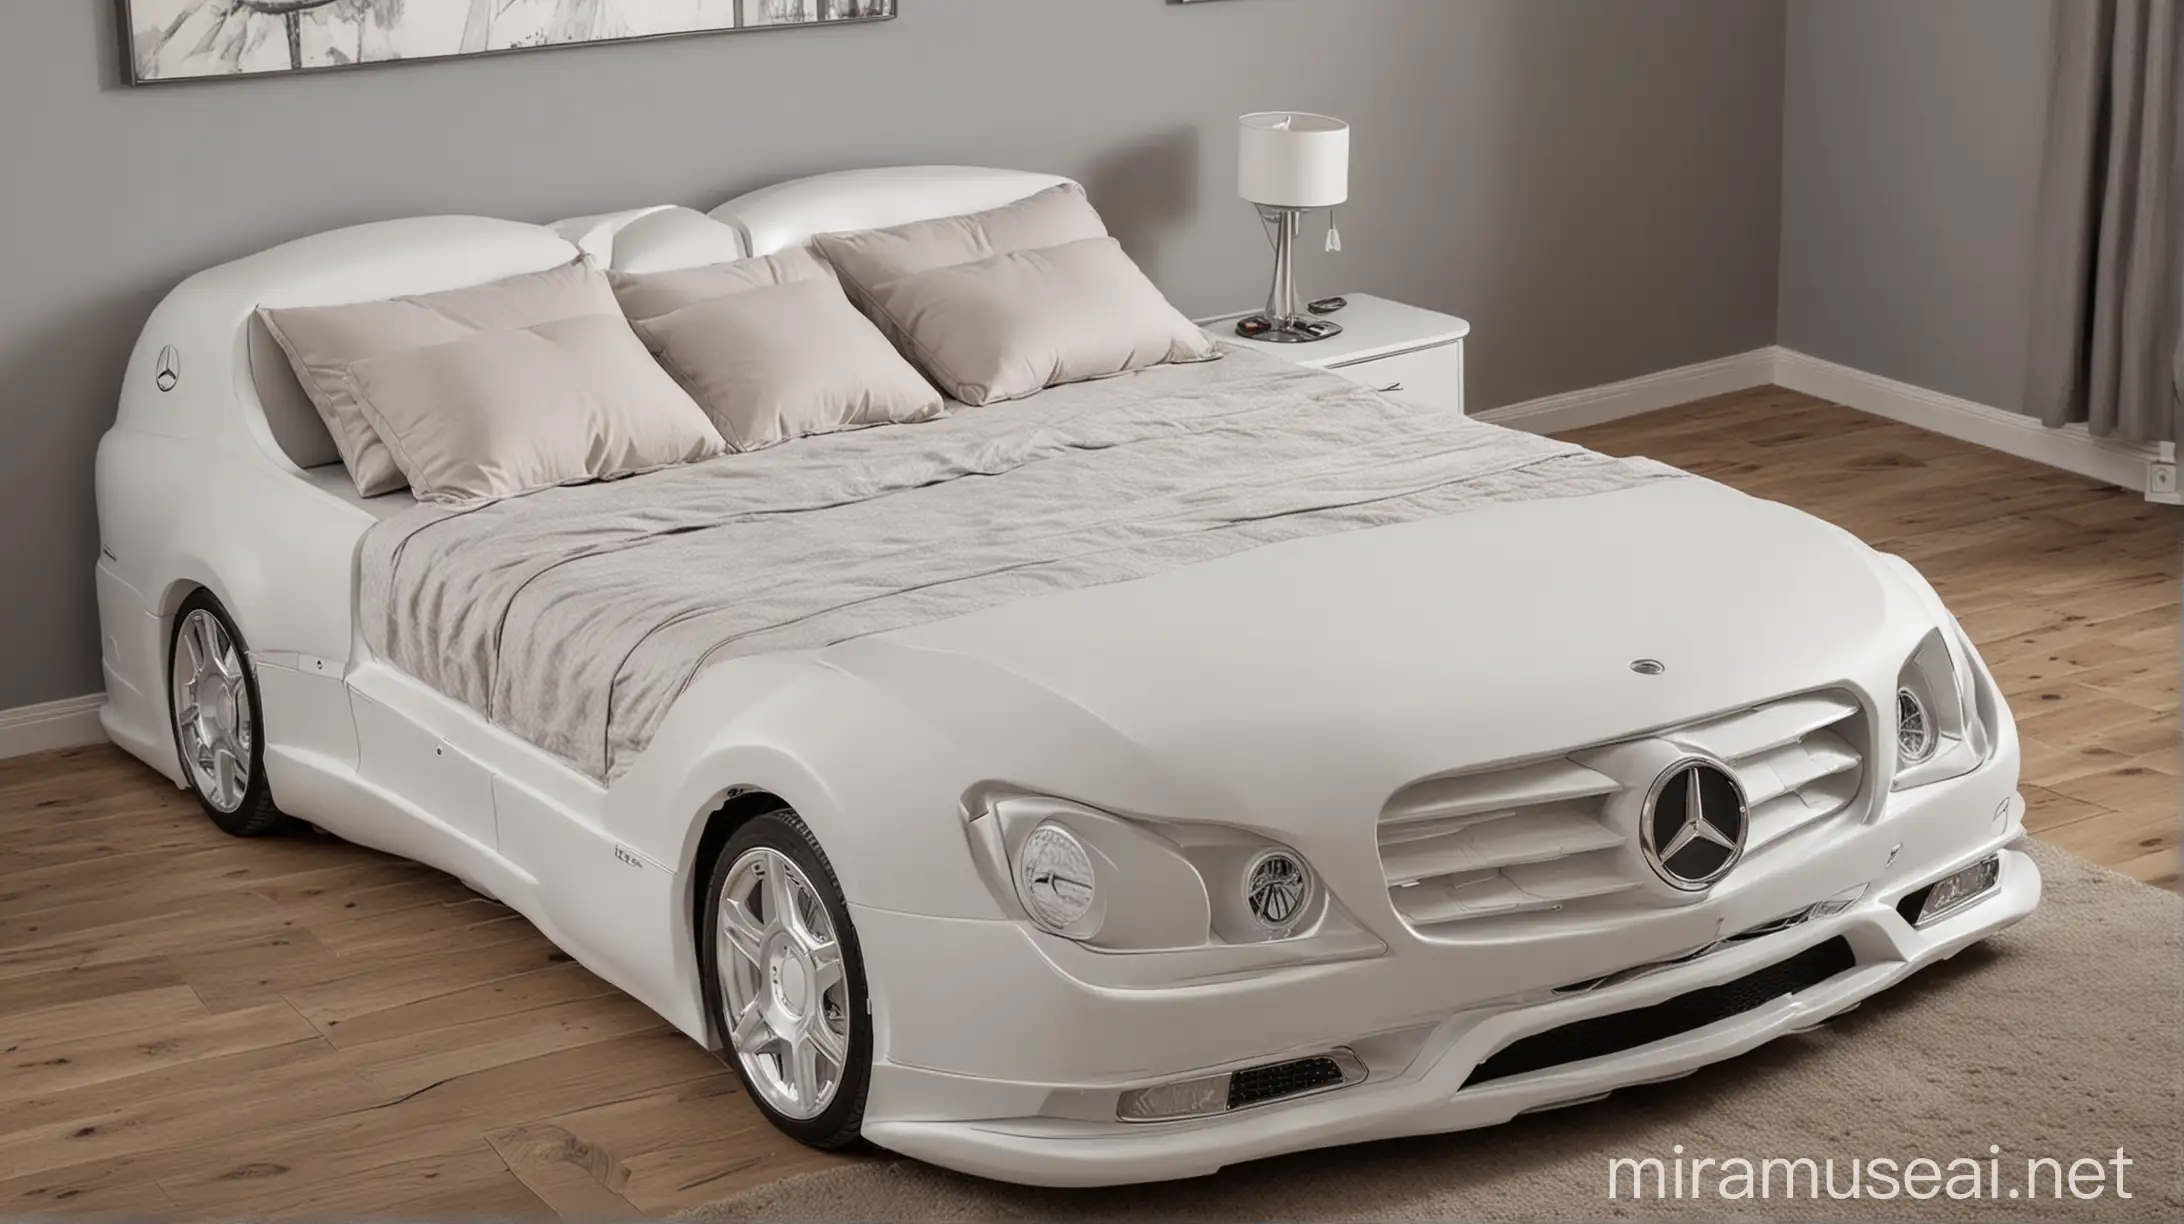 Luxurious Mercedes Car Shaped Double Bed for Modern Bedrooms